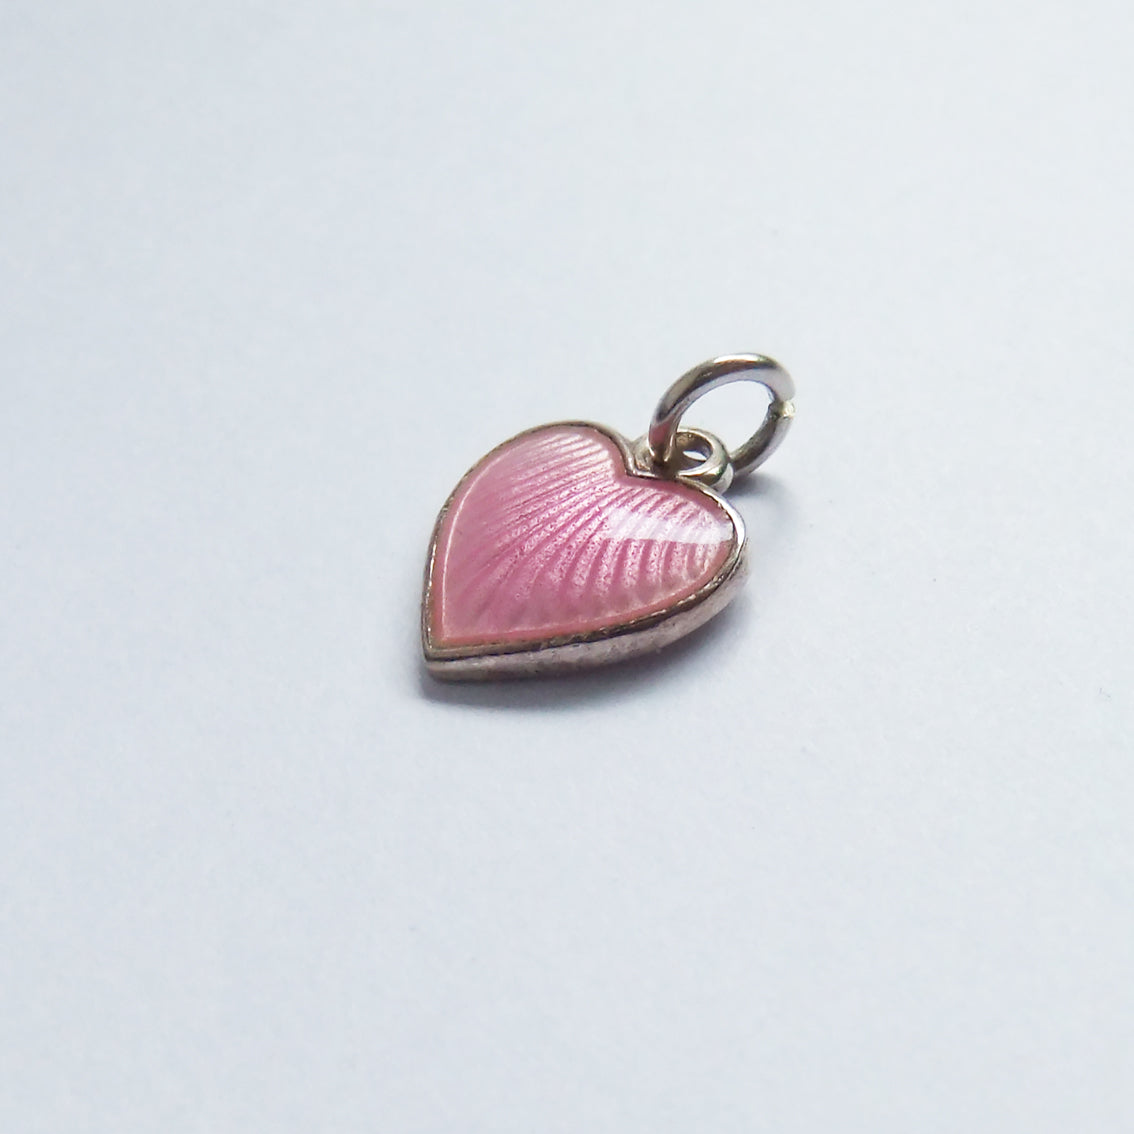 Cecily Pink - The Neon Pink Enamel Heart Charm